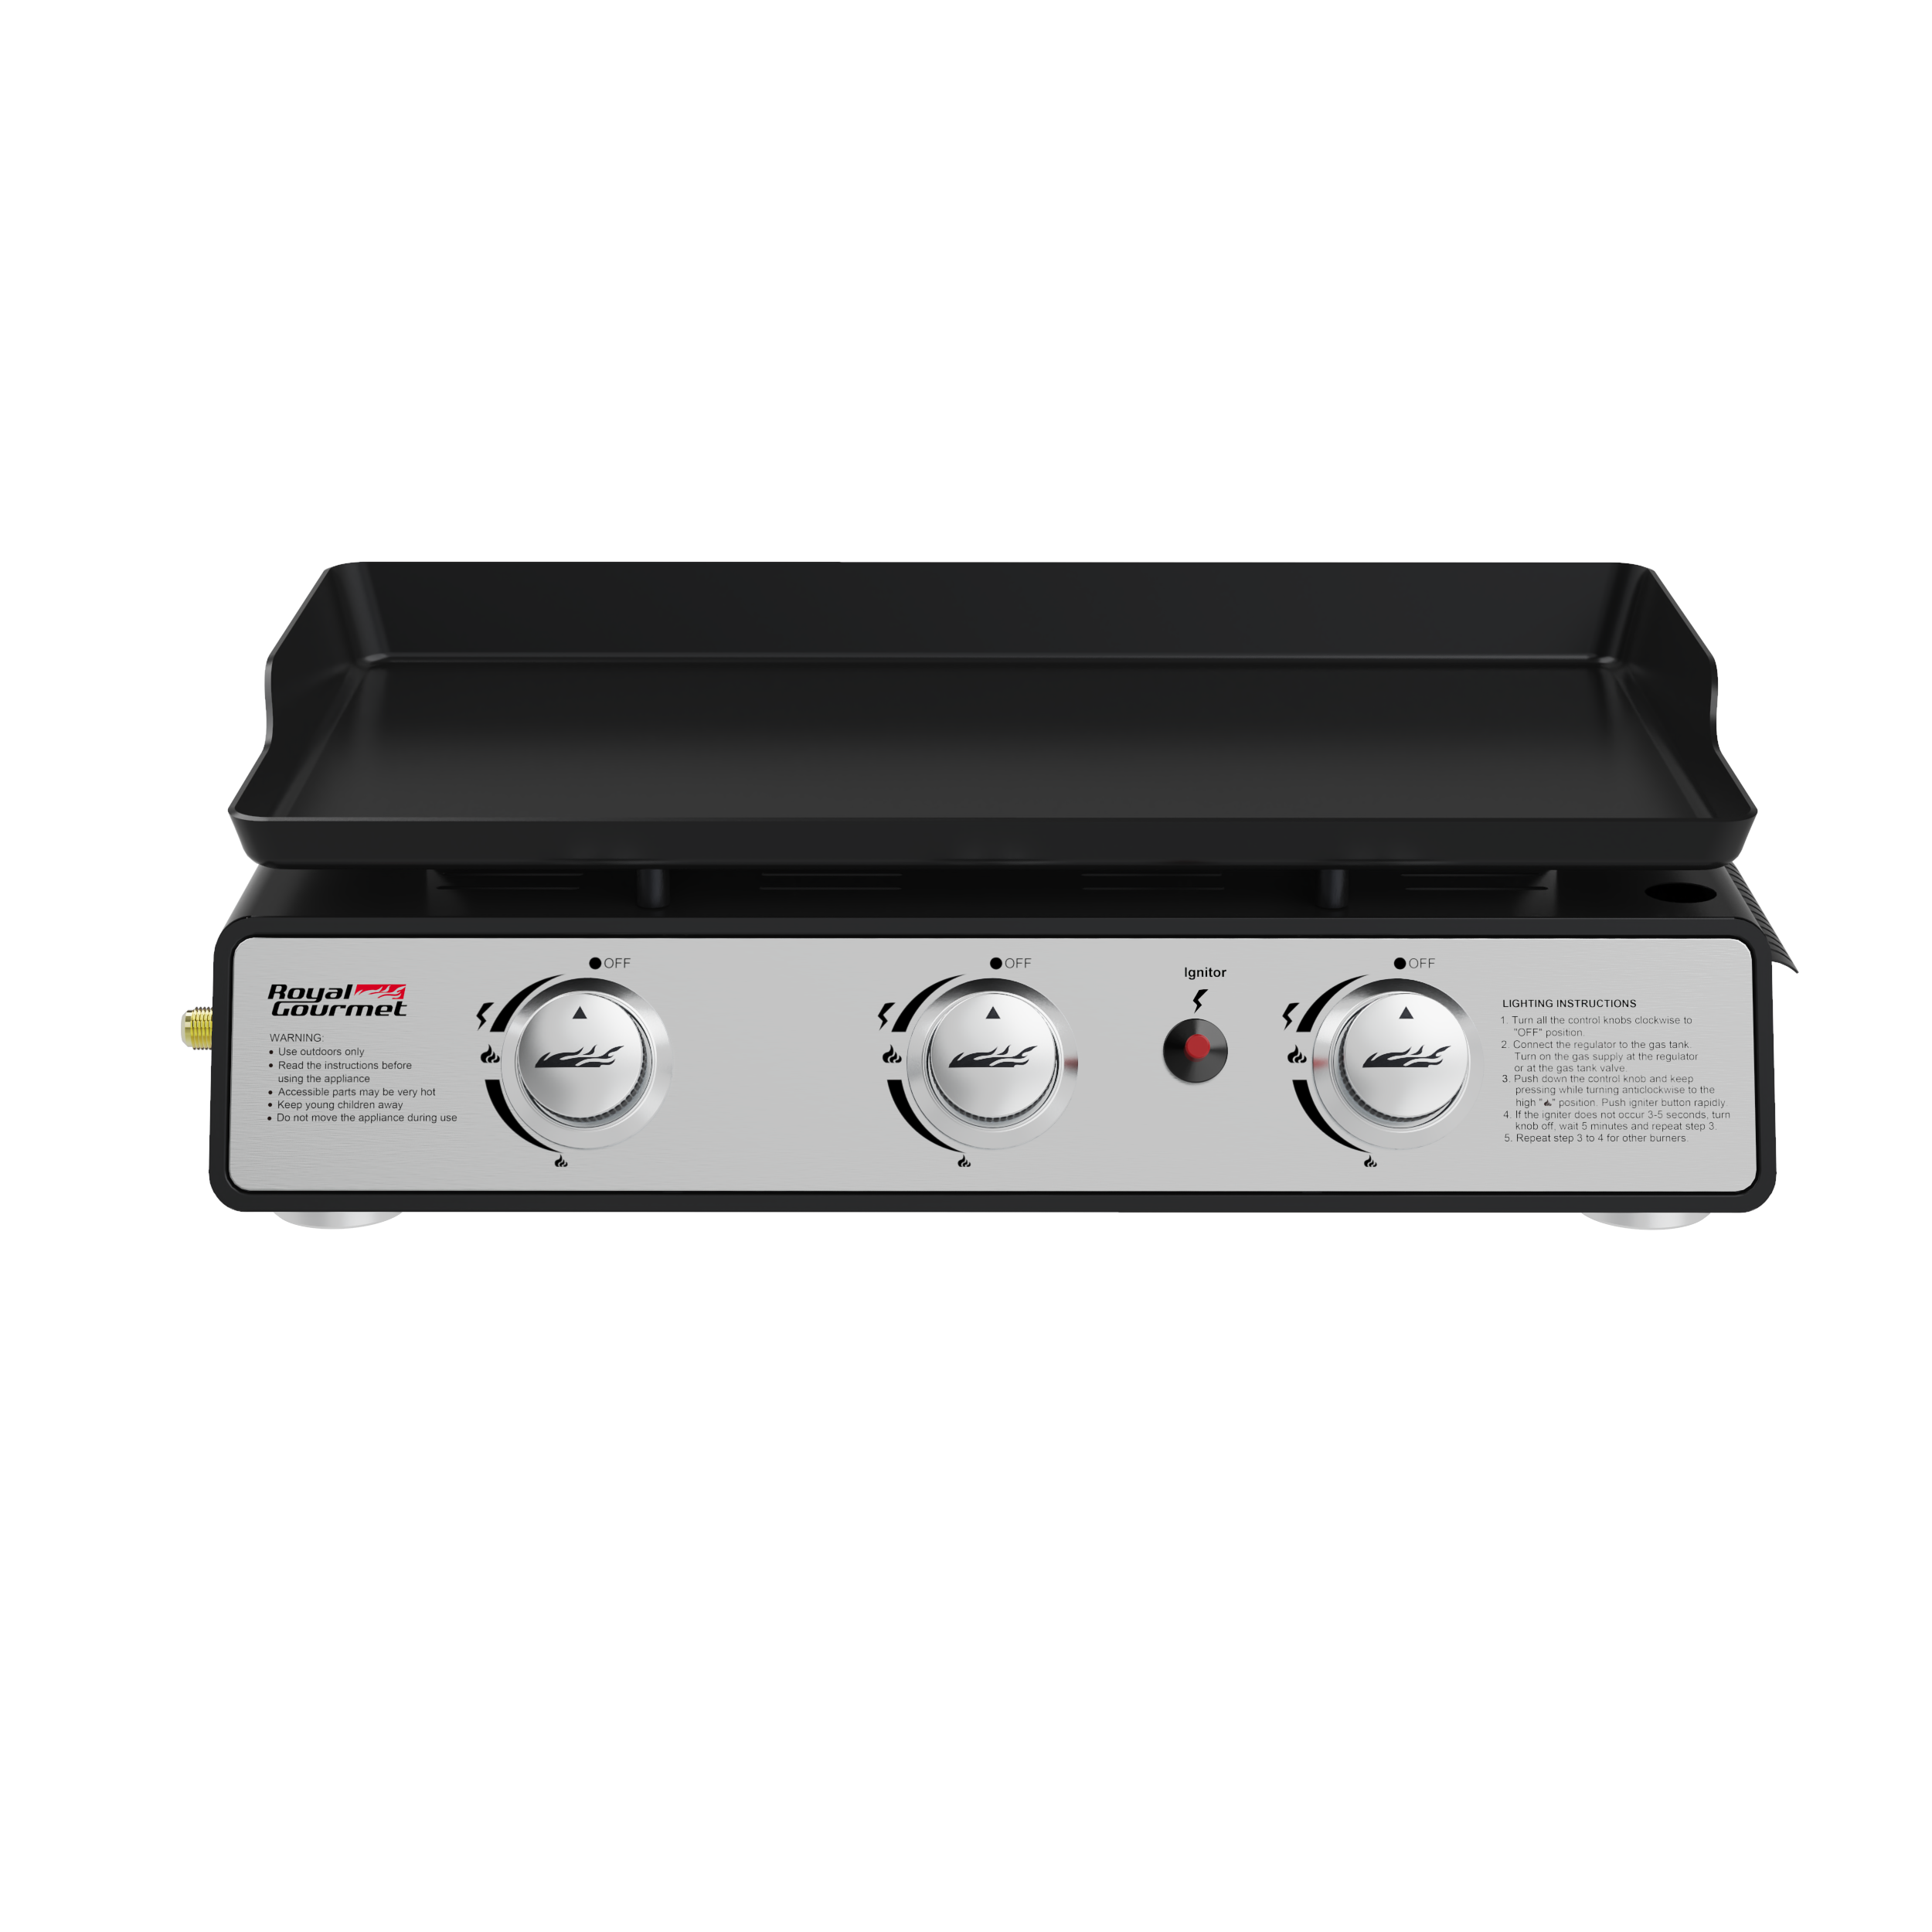 Royal Gourmet Pd1300 Portable 3-Burner Propane GAS Grill Griddle